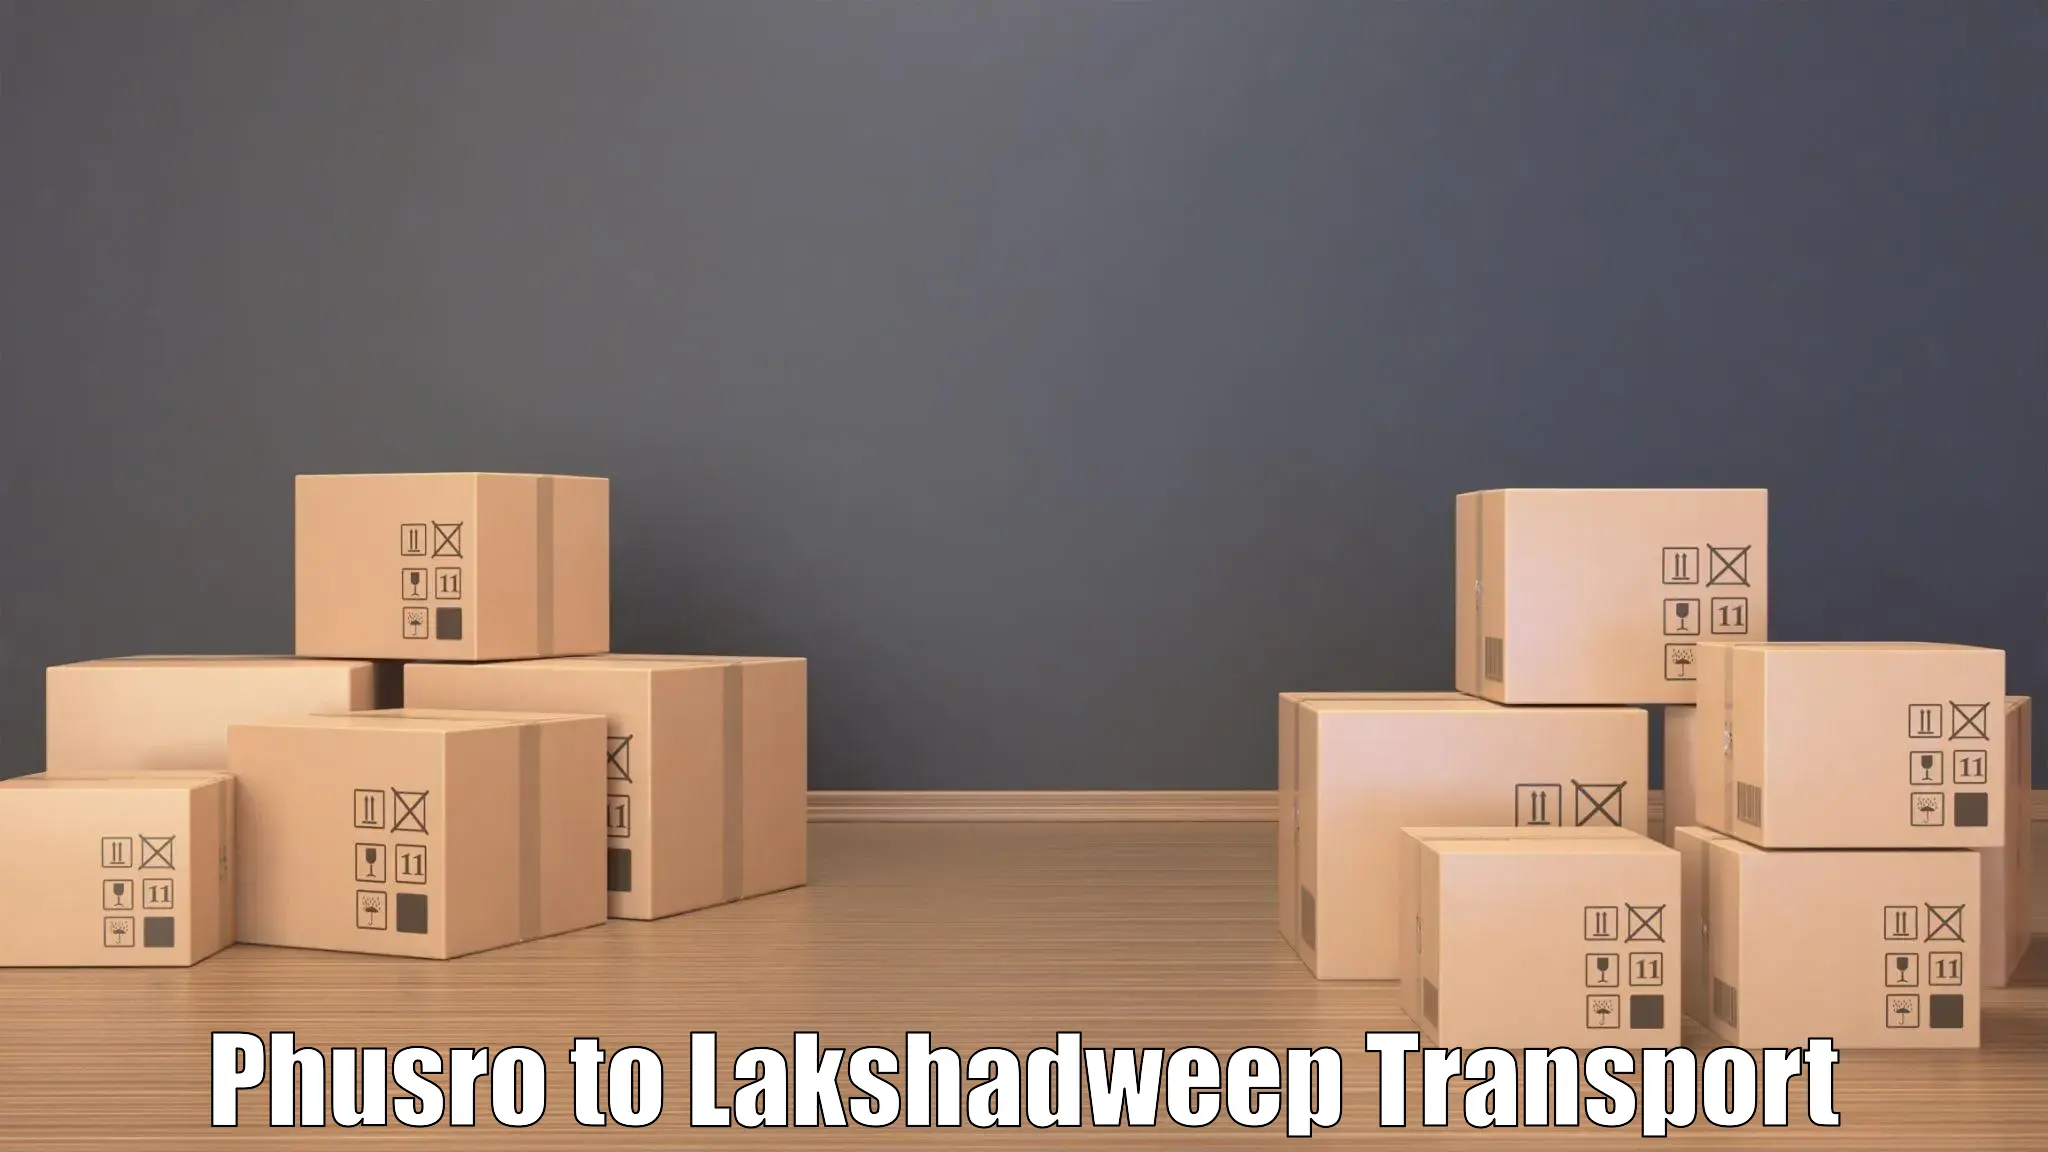 Transport bike from one state to another Phusro to Lakshadweep